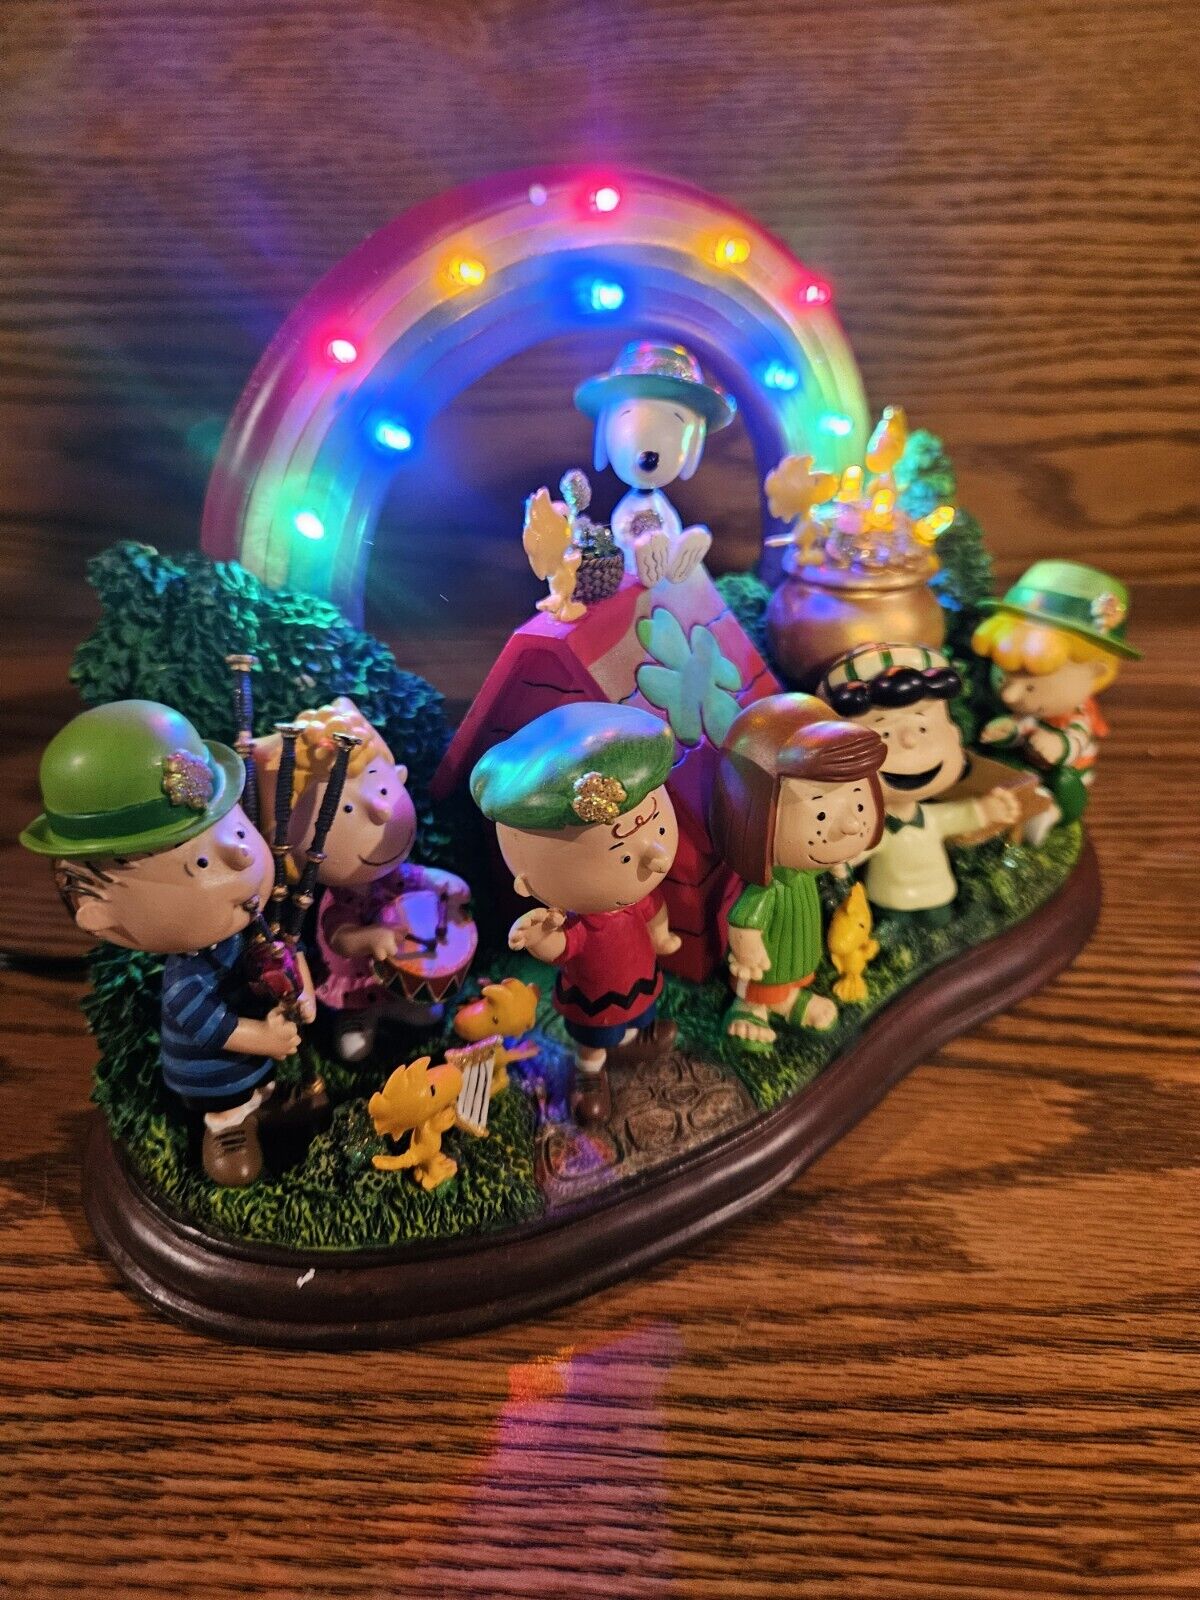 Peanuts / Snoopy Home Of The Irish Danbury Mint Lighted Sculpture